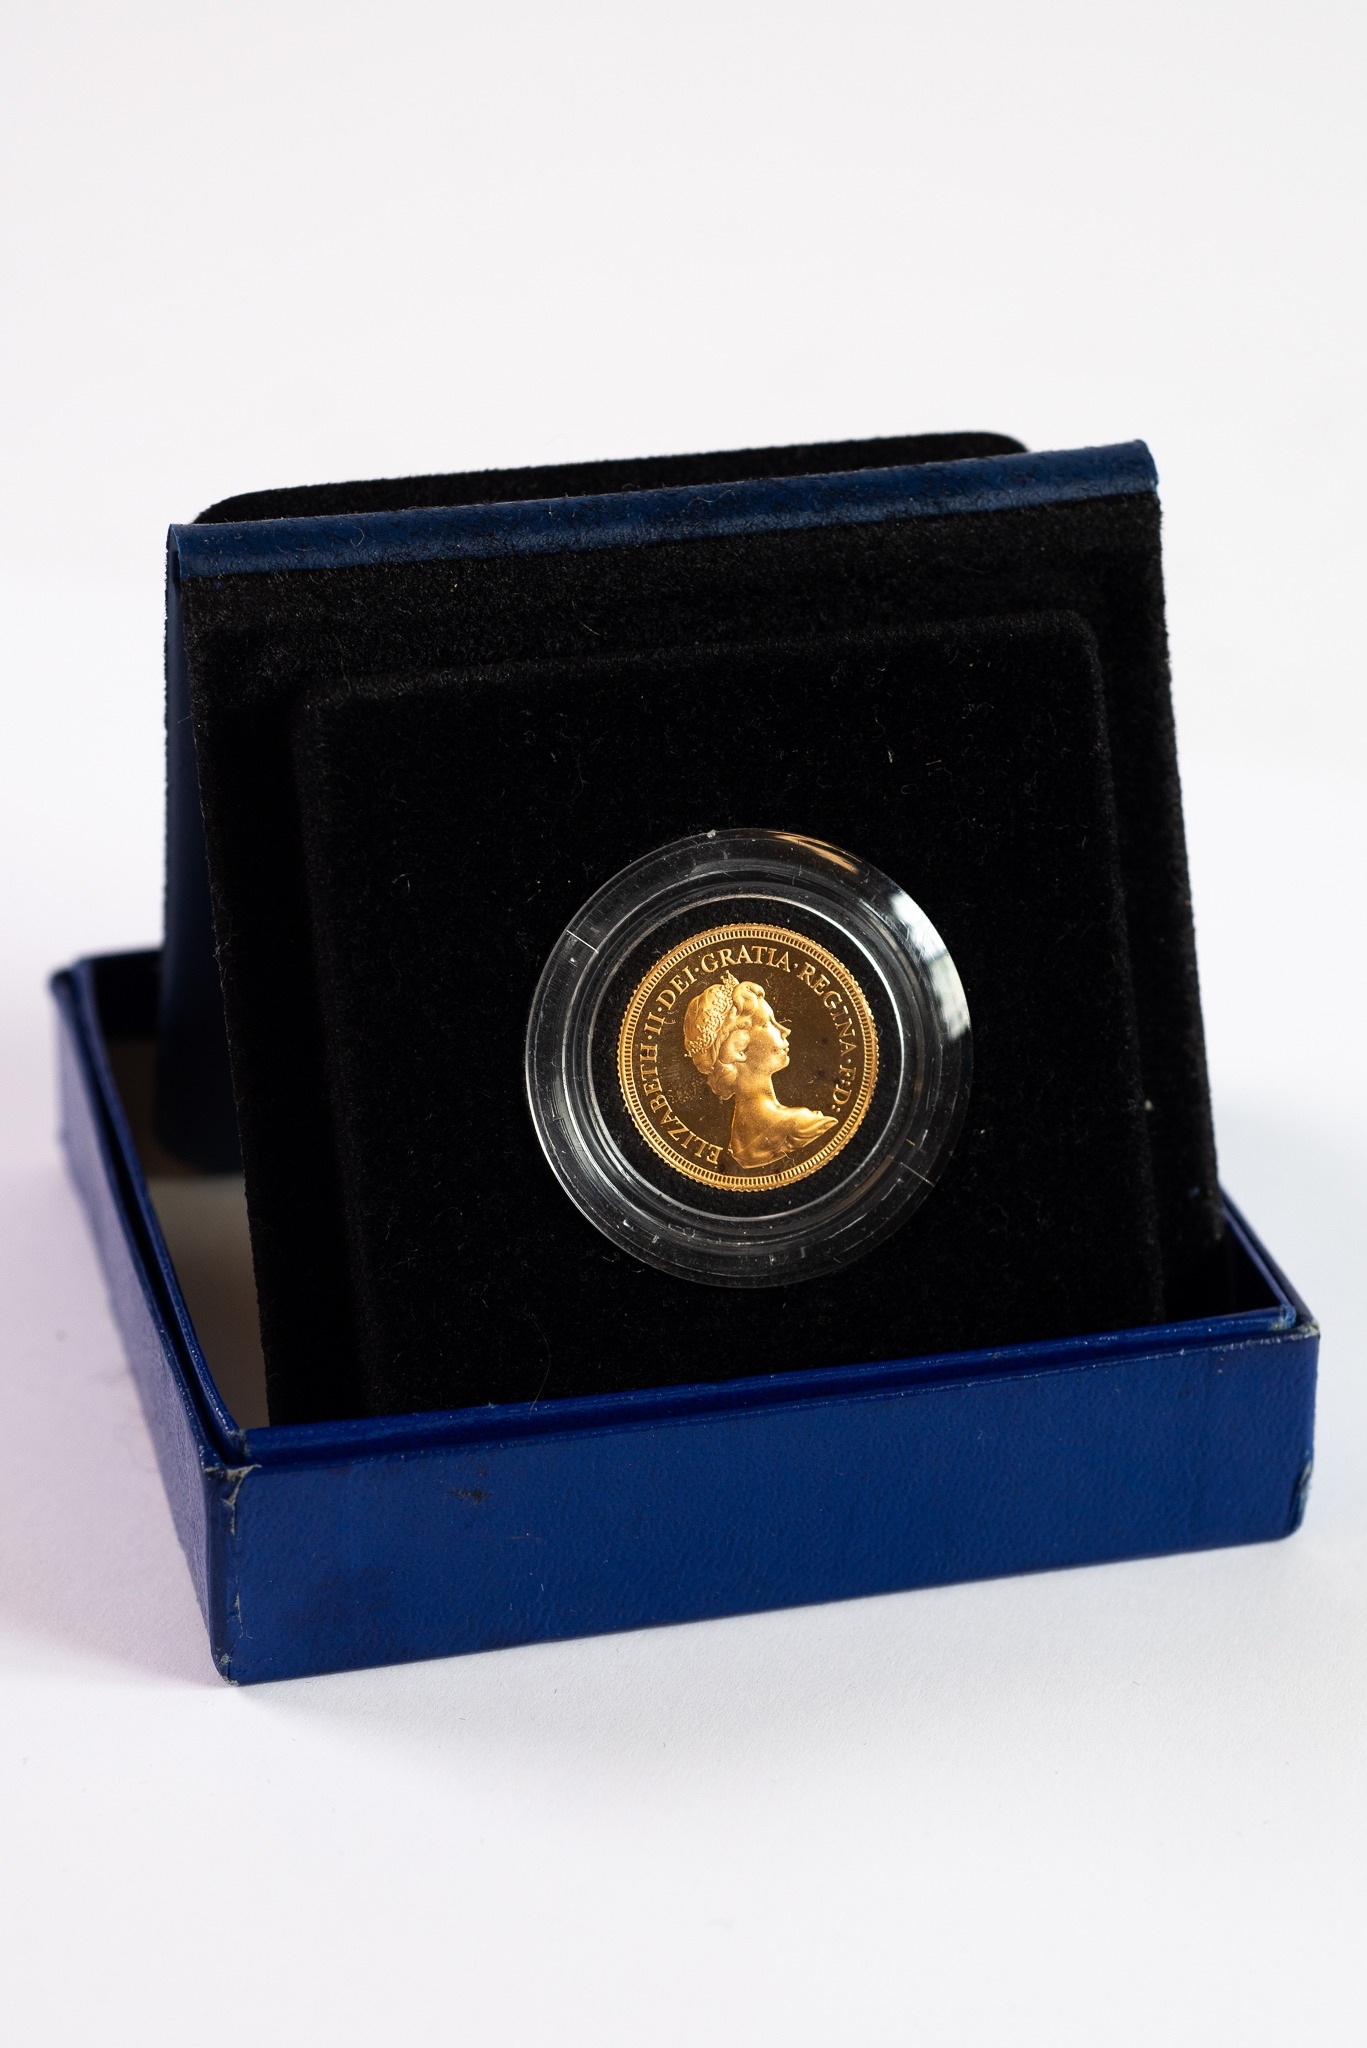 QUEEN ELIZABETH II 1979 BRILLIANT UNCIRCULATED GOLD SOVEREIGN, encapsulated and in Royal Mint blue